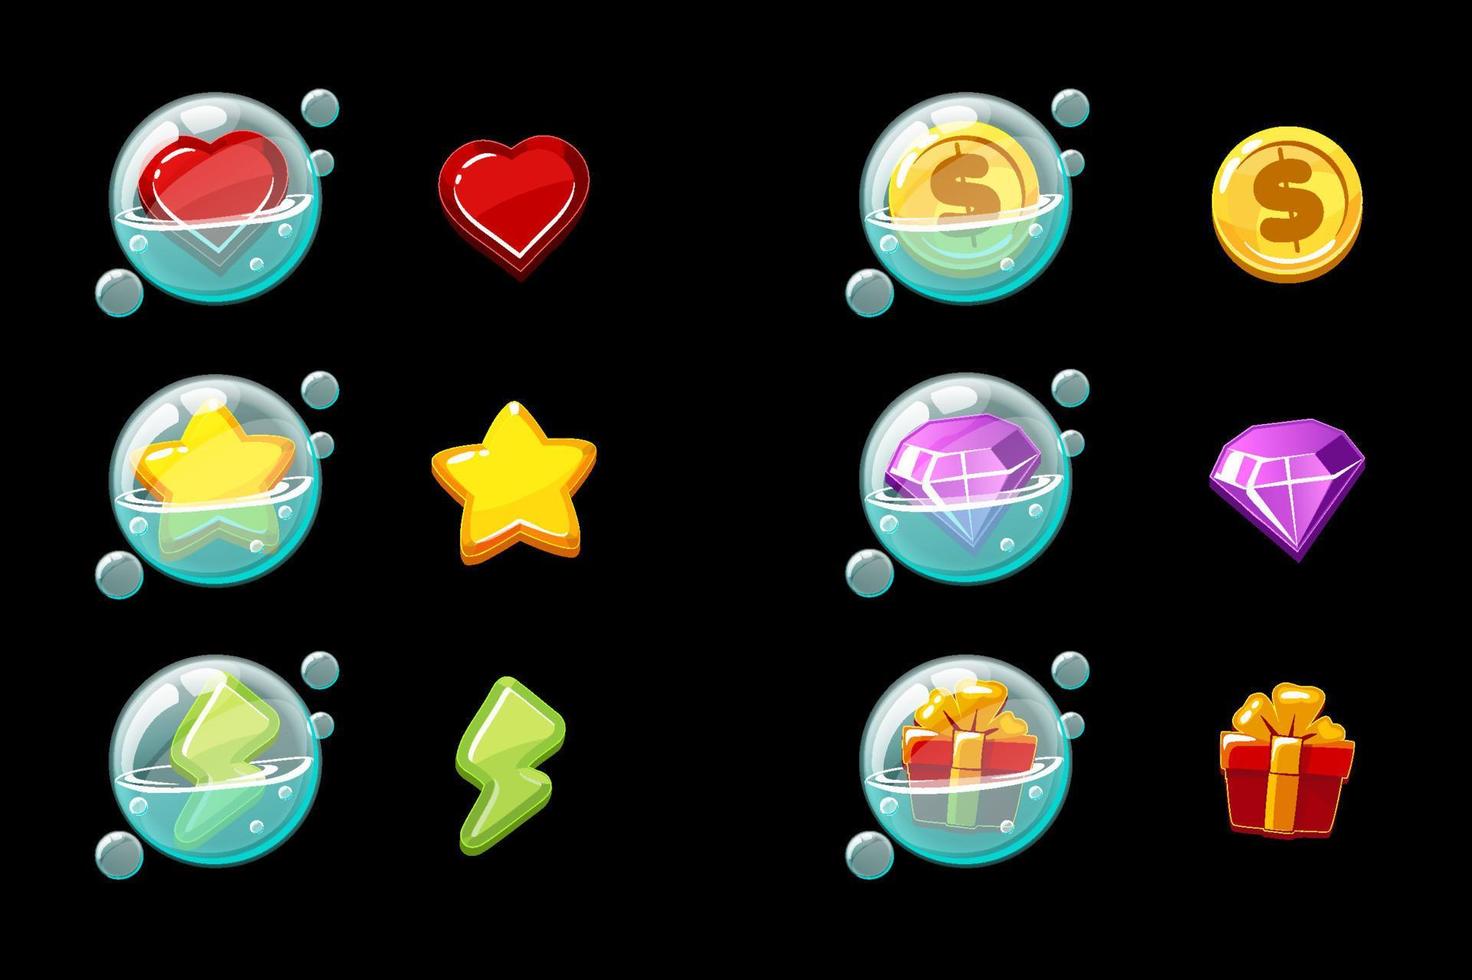 Set of vector isolated game icons in bubbles. Soap bubbles with objects for the interface or game menu.